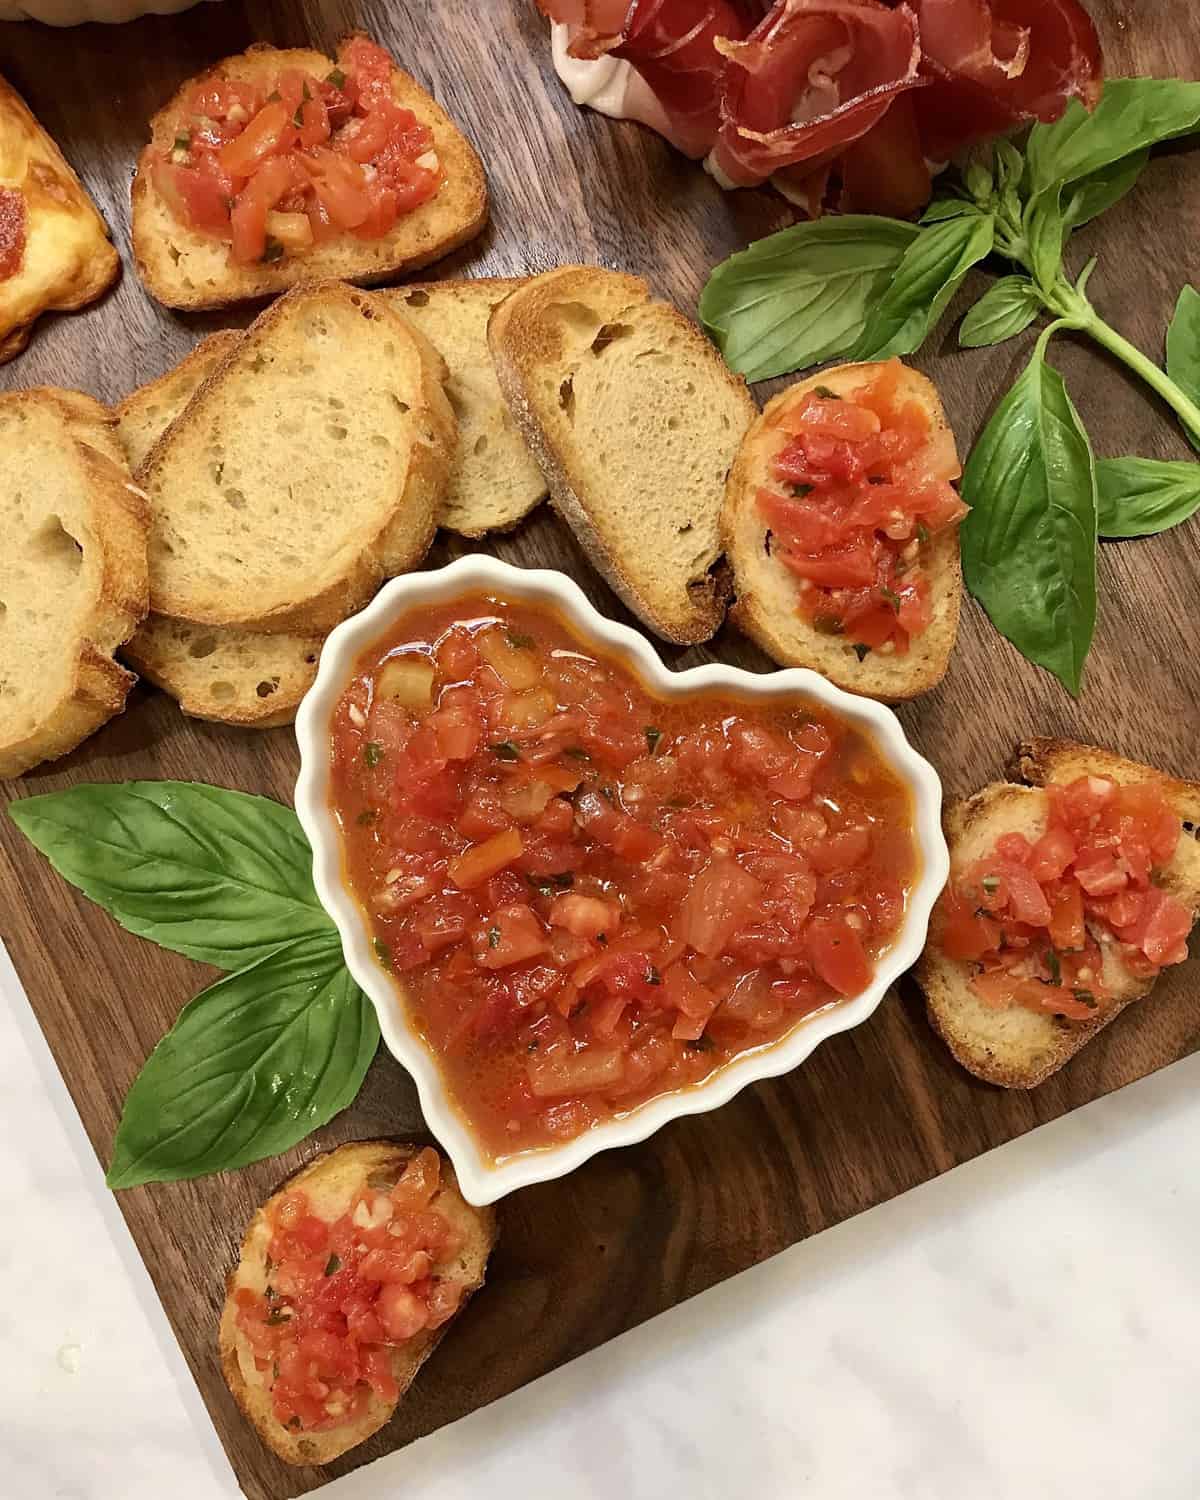 Italian-Themed Valentine's Day Dinner Board by The BakerMama